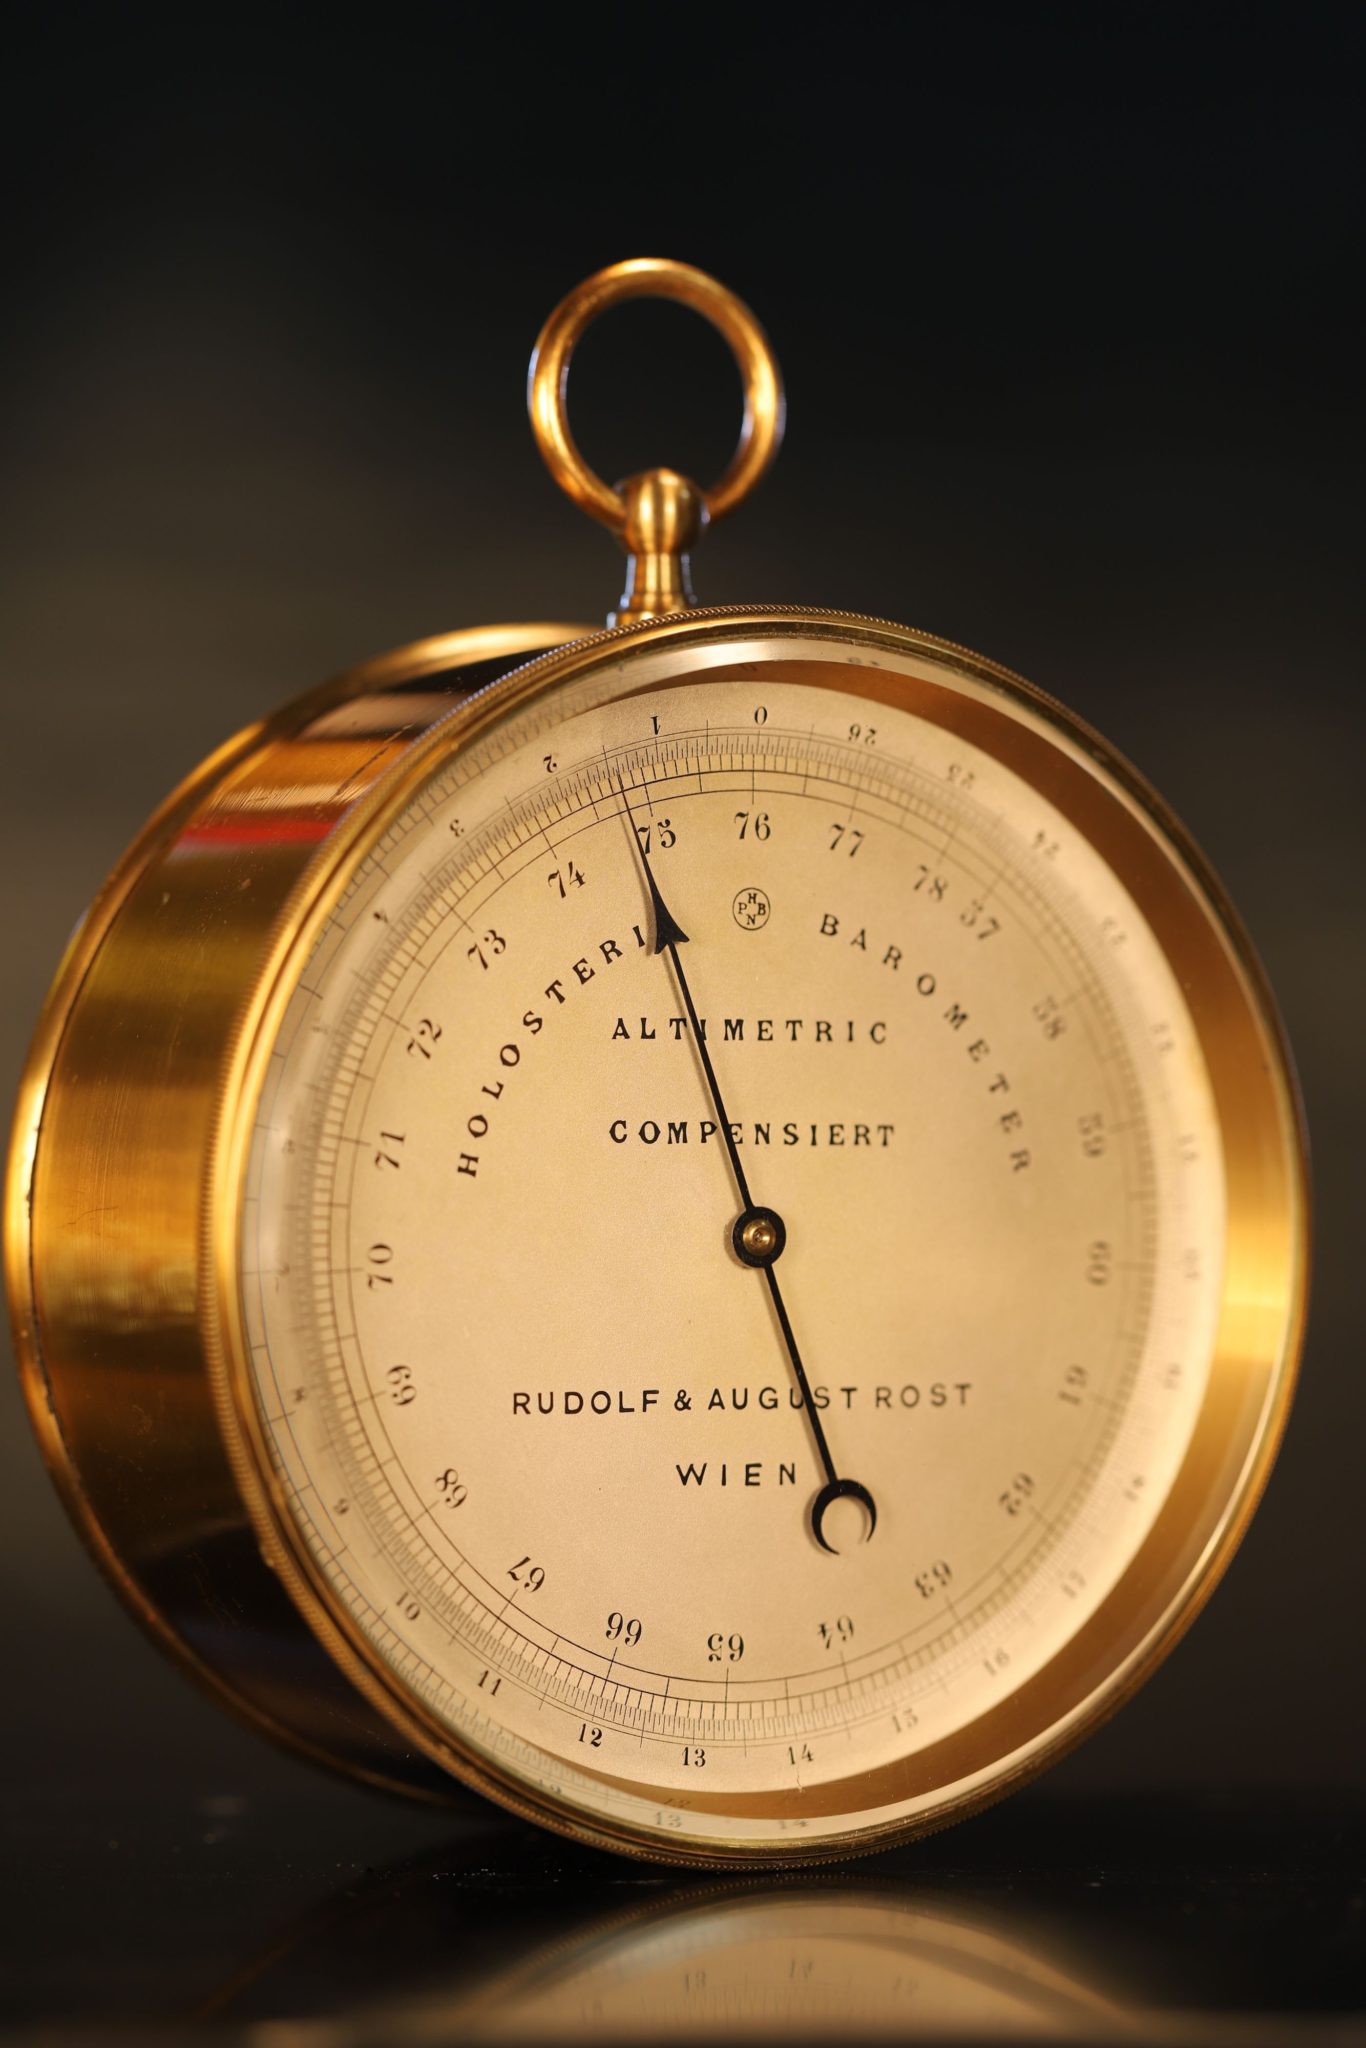 ANEROID BAROMETER ALTIMETER BY NAUDET RETAILED BY ROST c1875